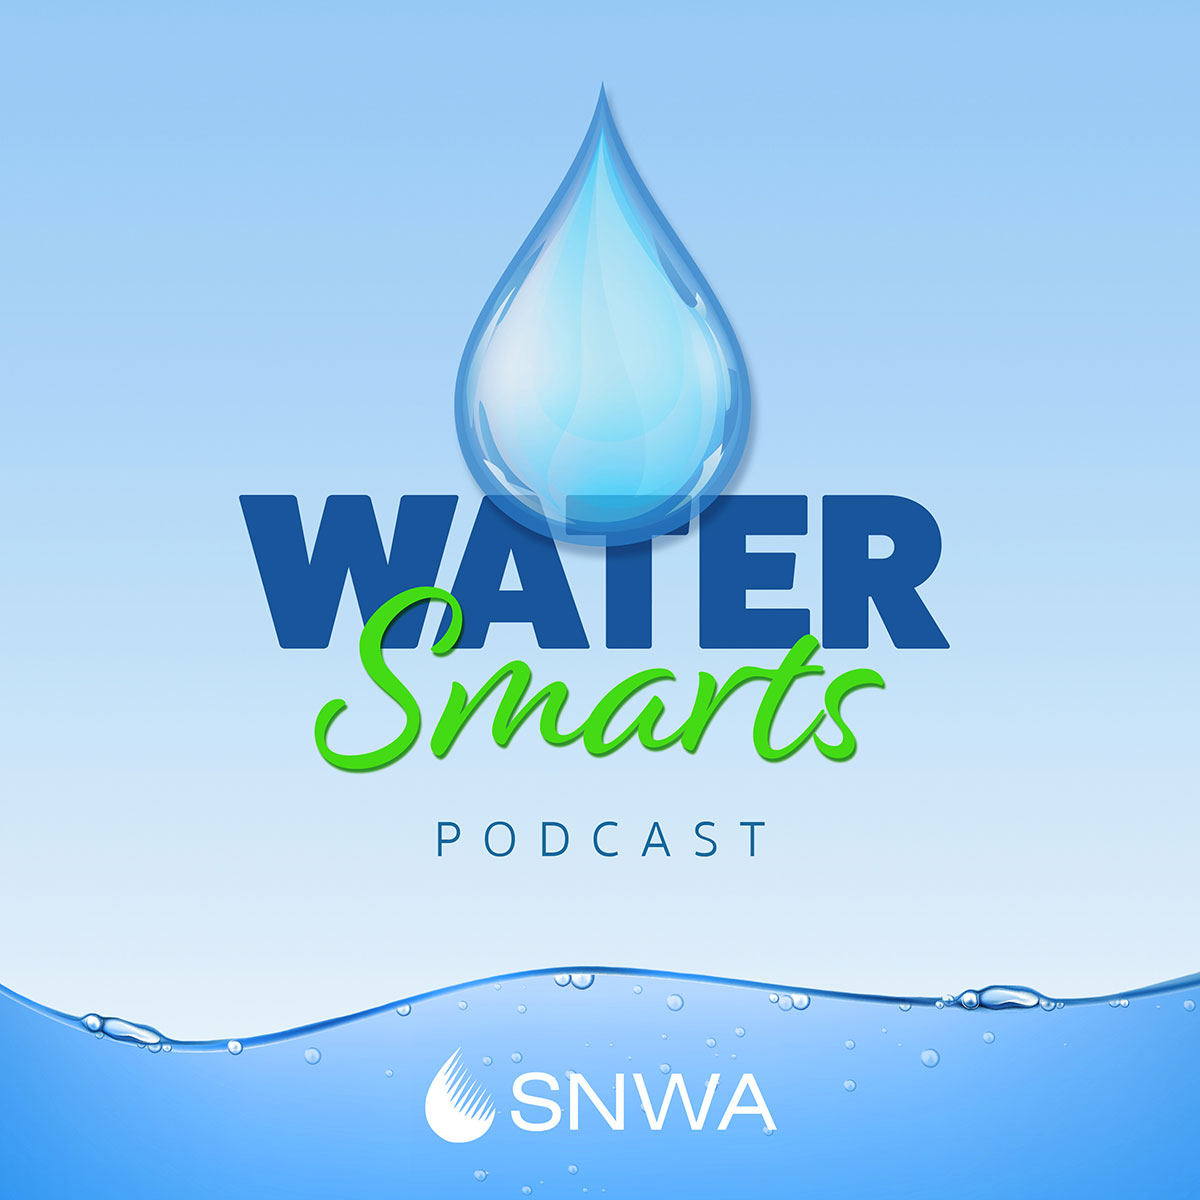 Water Smarts podcast logo